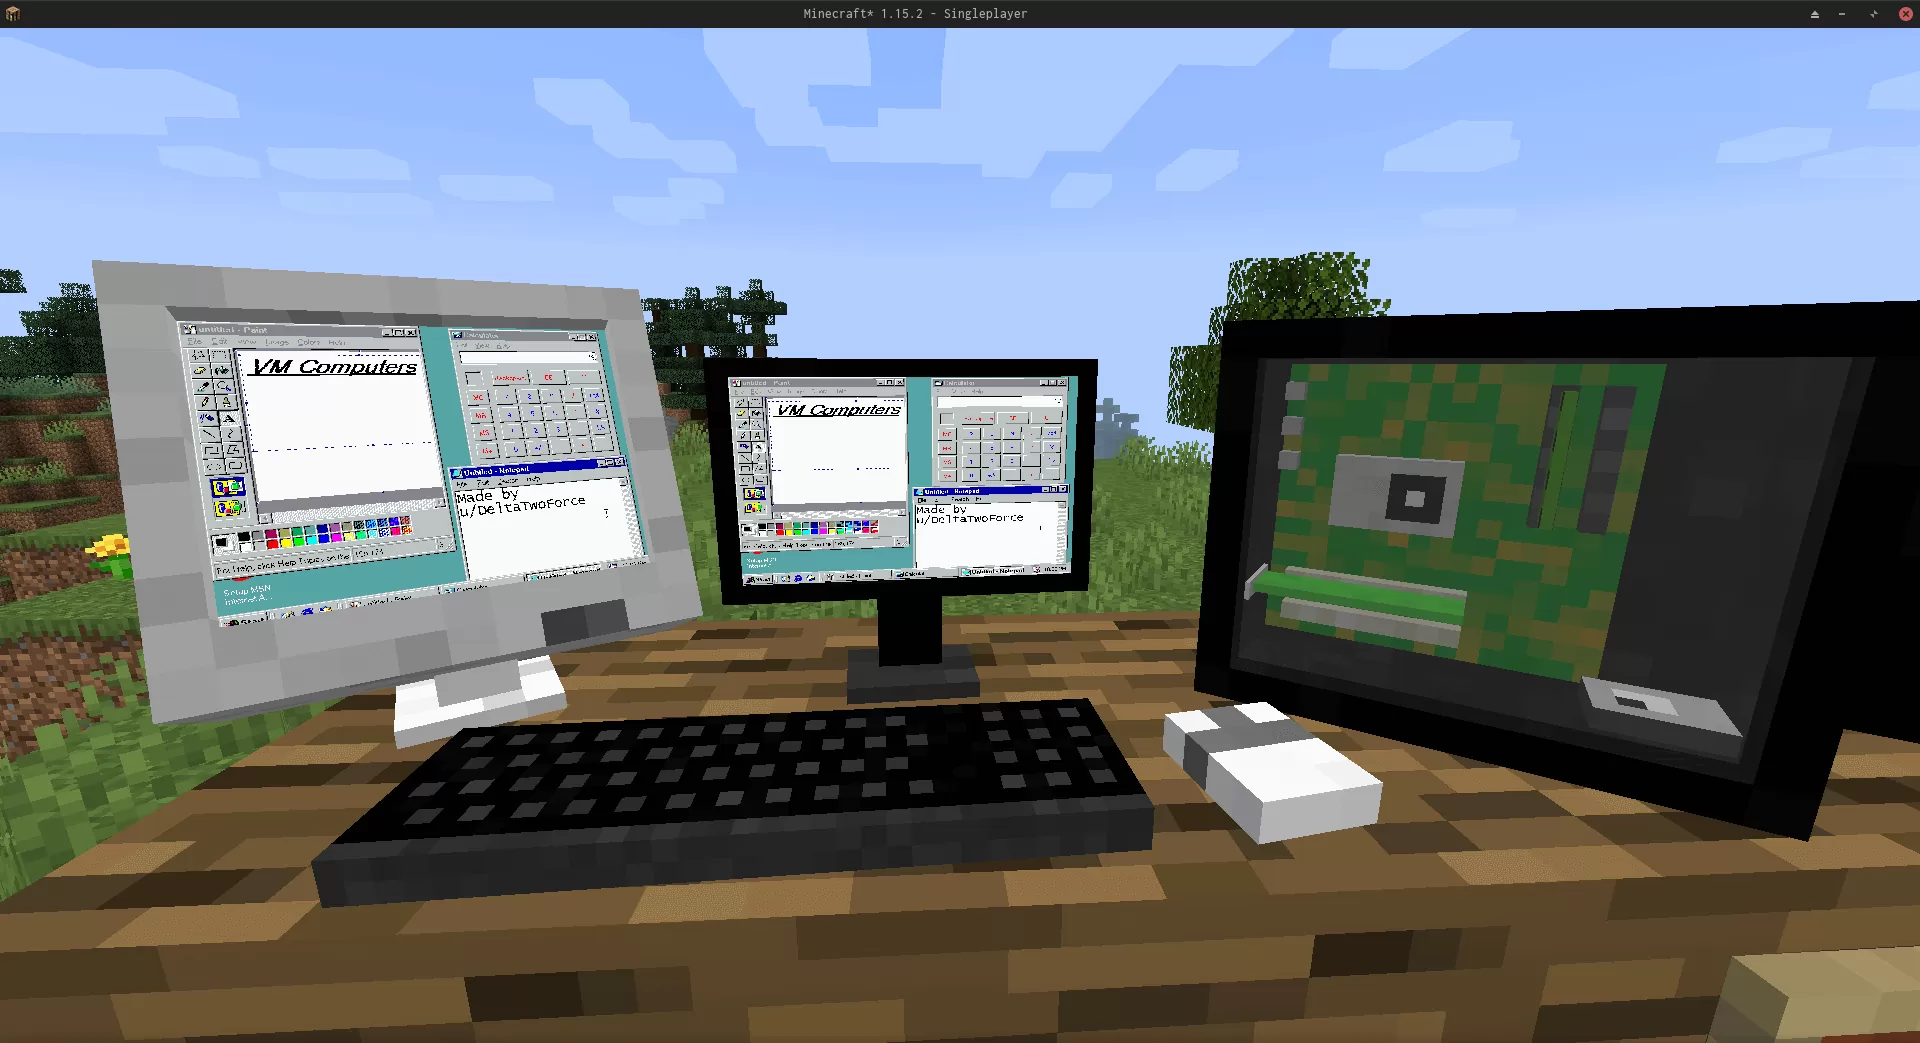 You can build a working PC inside Minecraft that plays games, including Doom and Minecraft